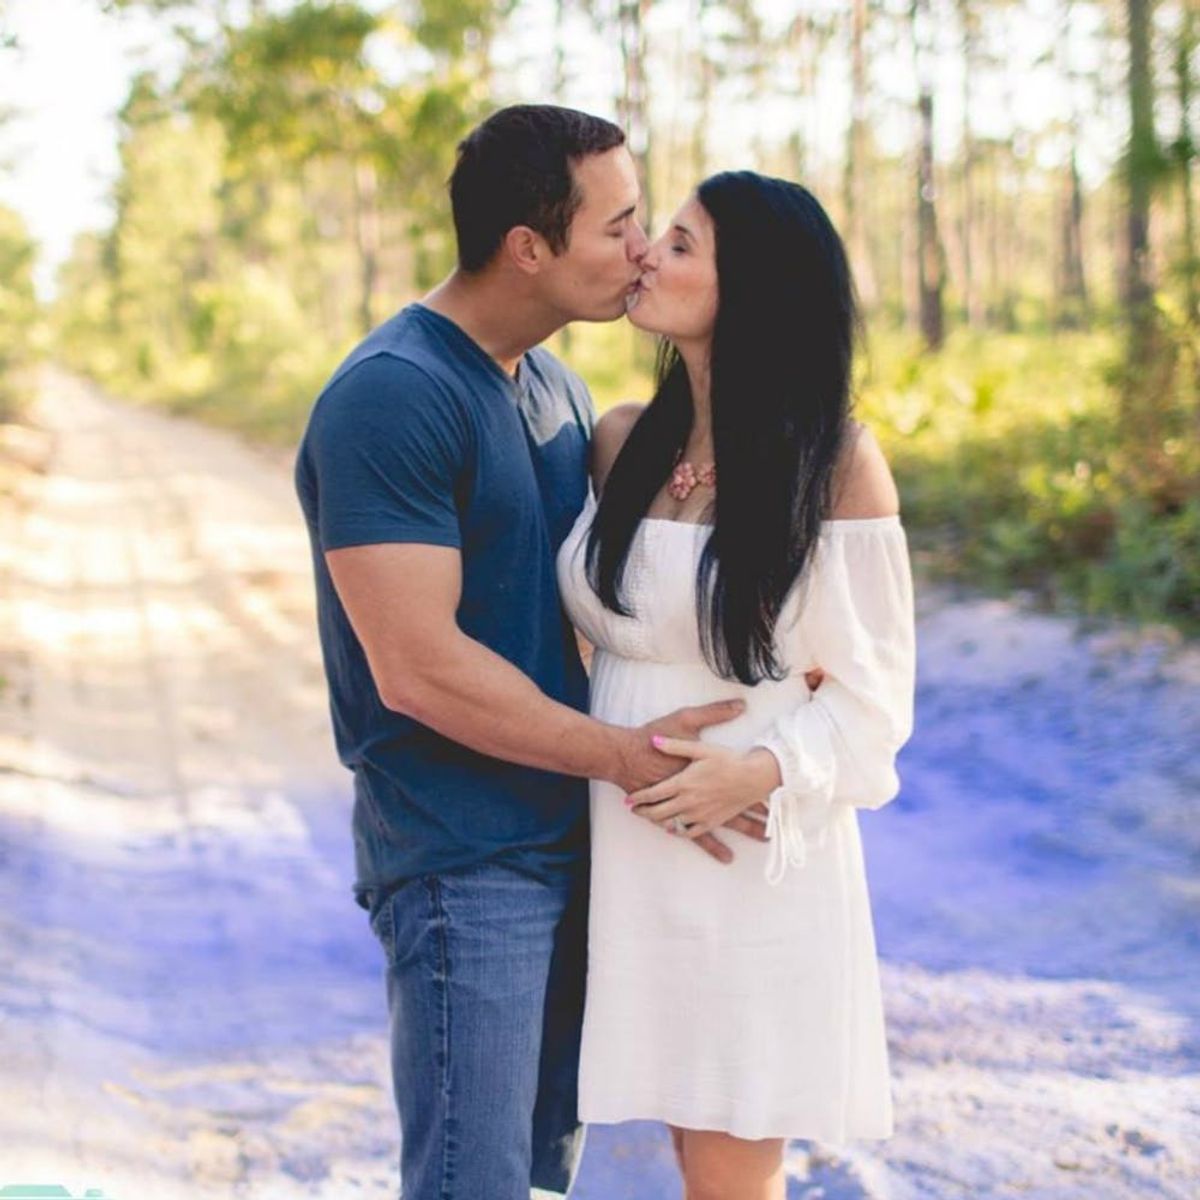 This Couple Revealed Their Baby’s Gender in This Totally Unexpected Way